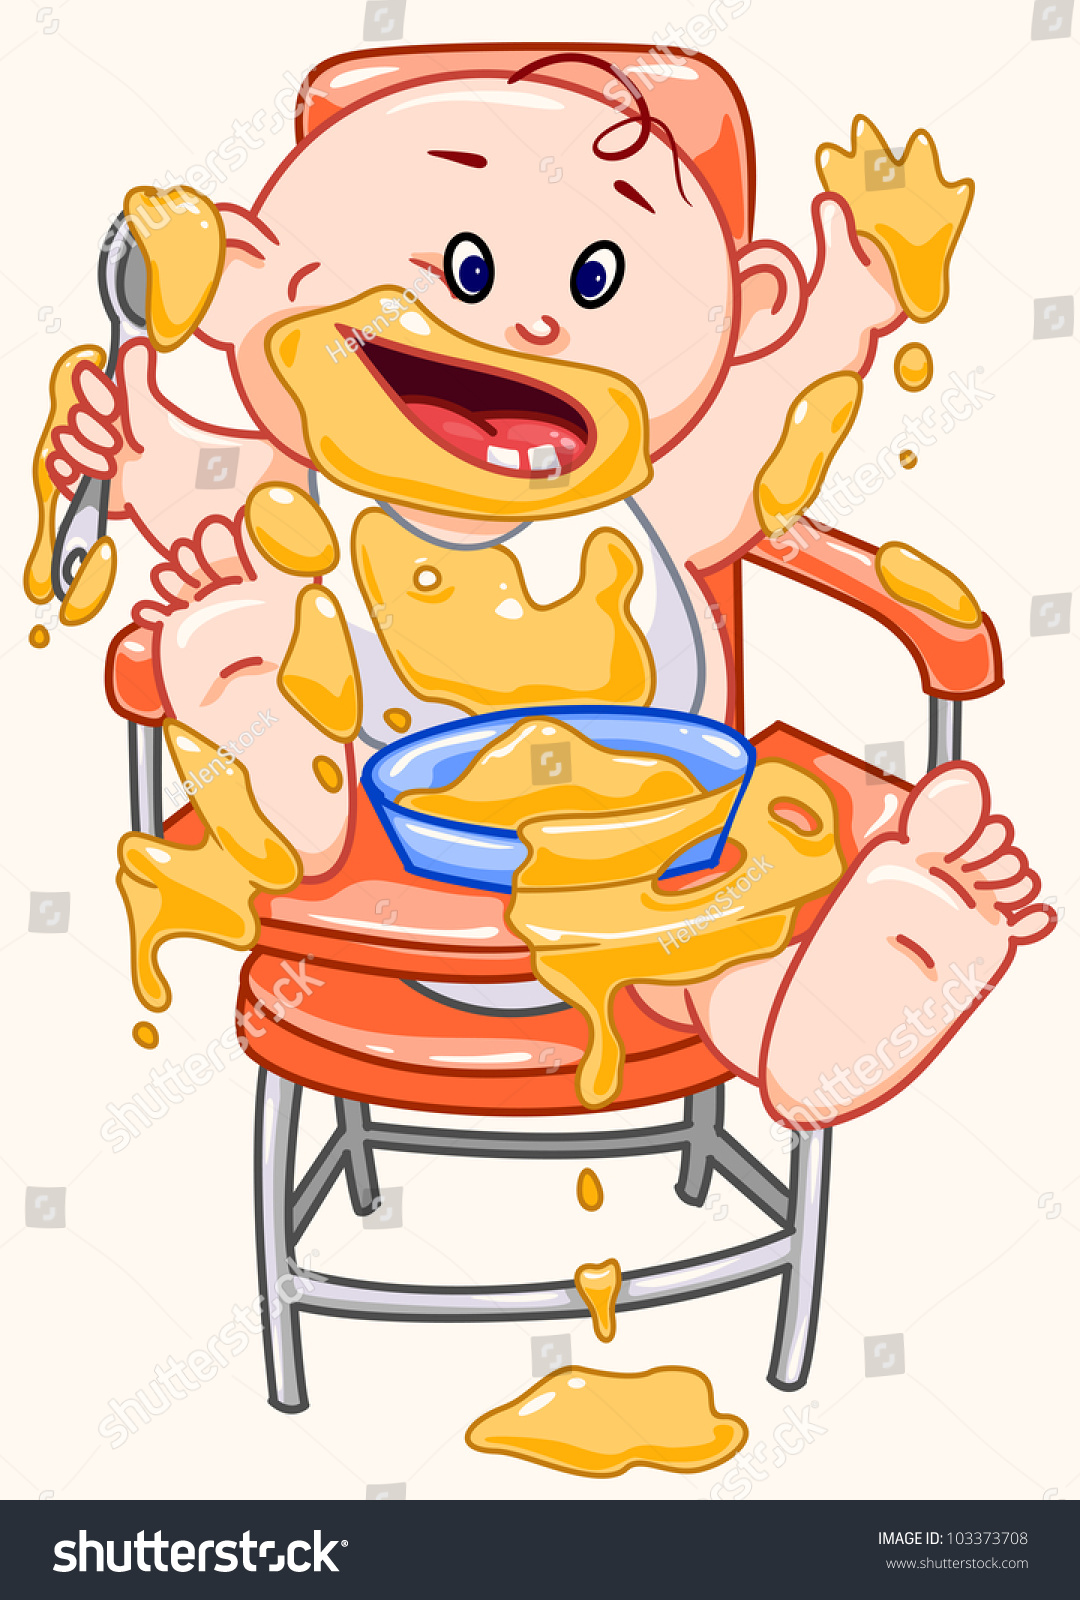 baby eating clipart - photo #10